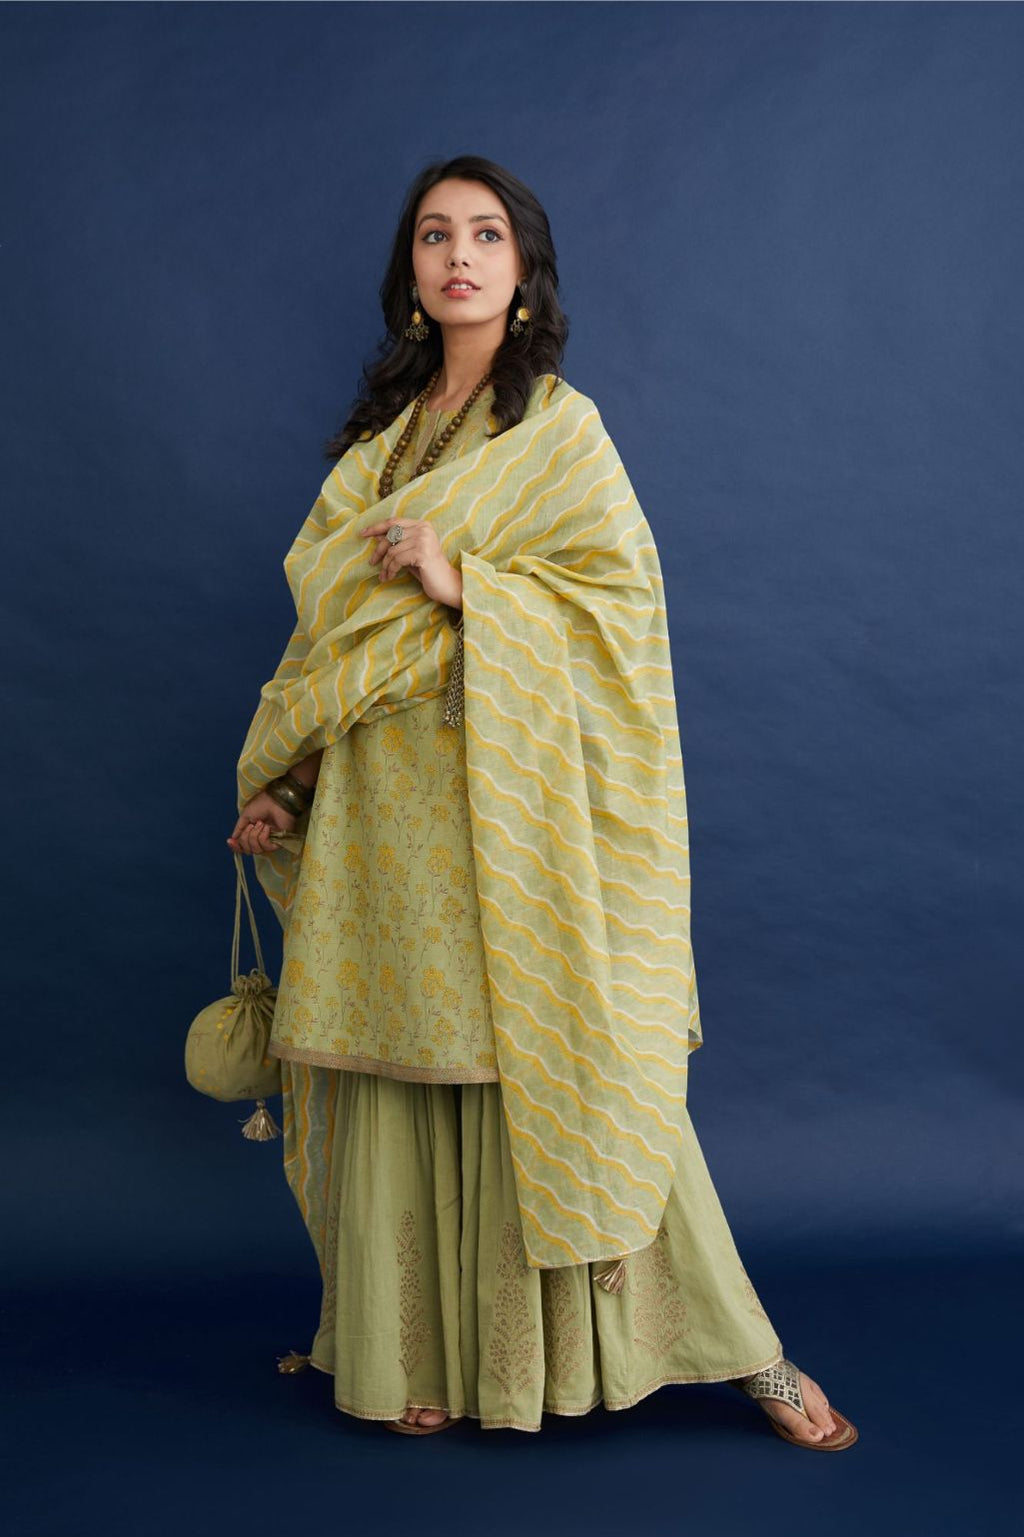 Green & yellow hand block printed short kurta set, highlighted with dull gold quilting.